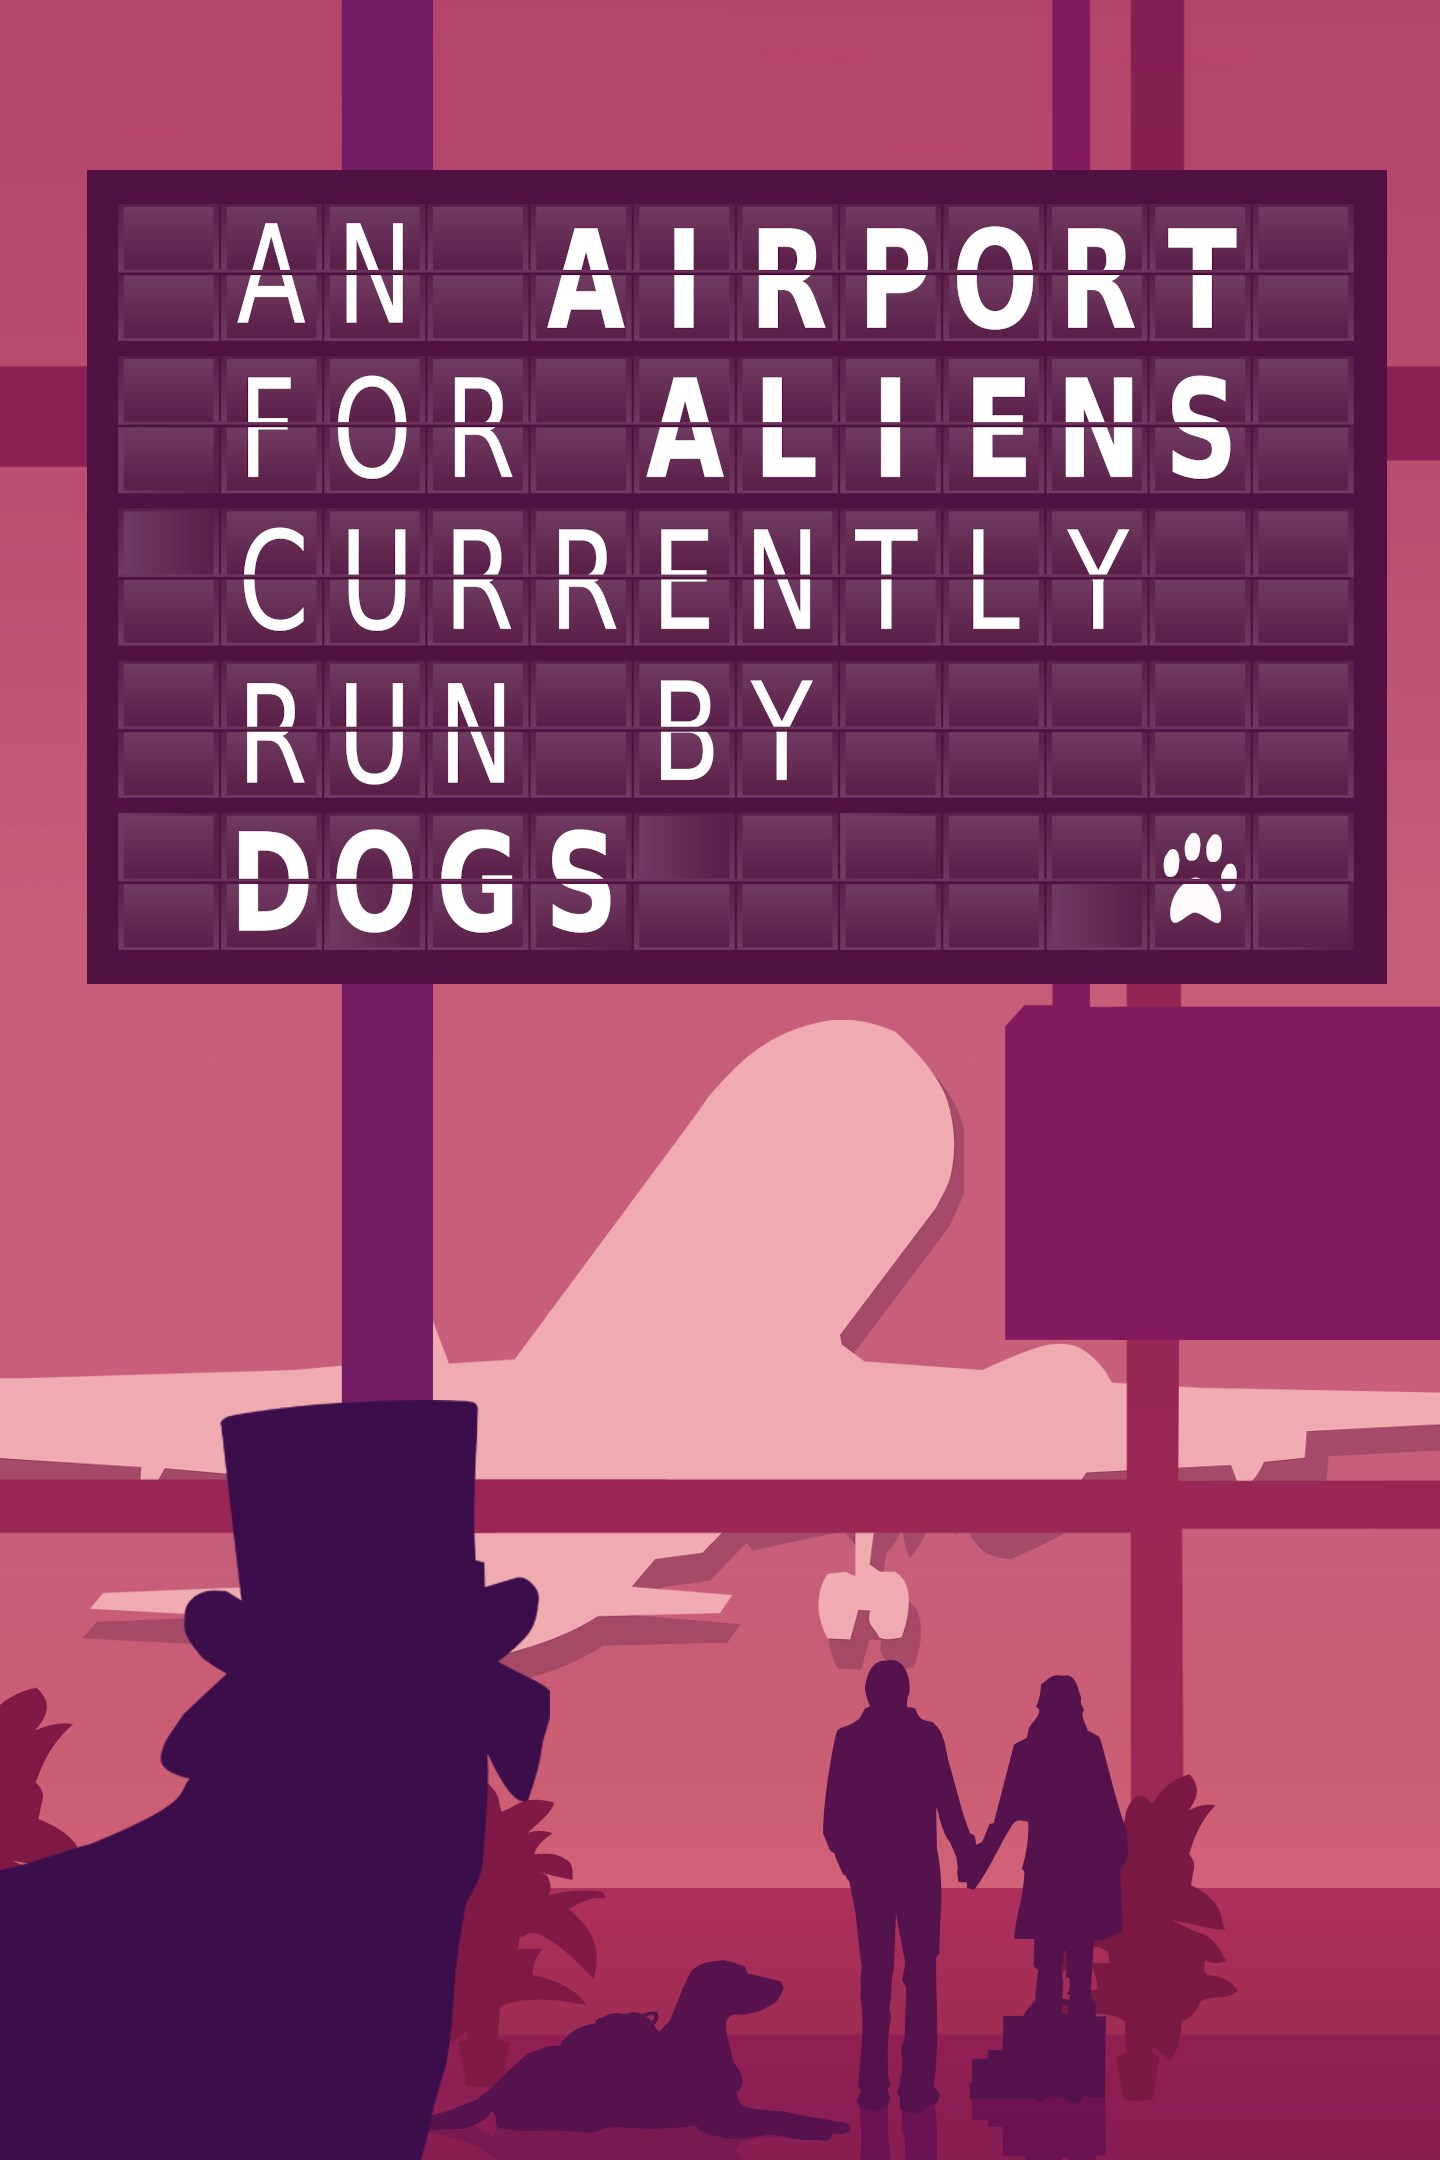 An Airport for Aliens Currently Run by Dogs boxshot